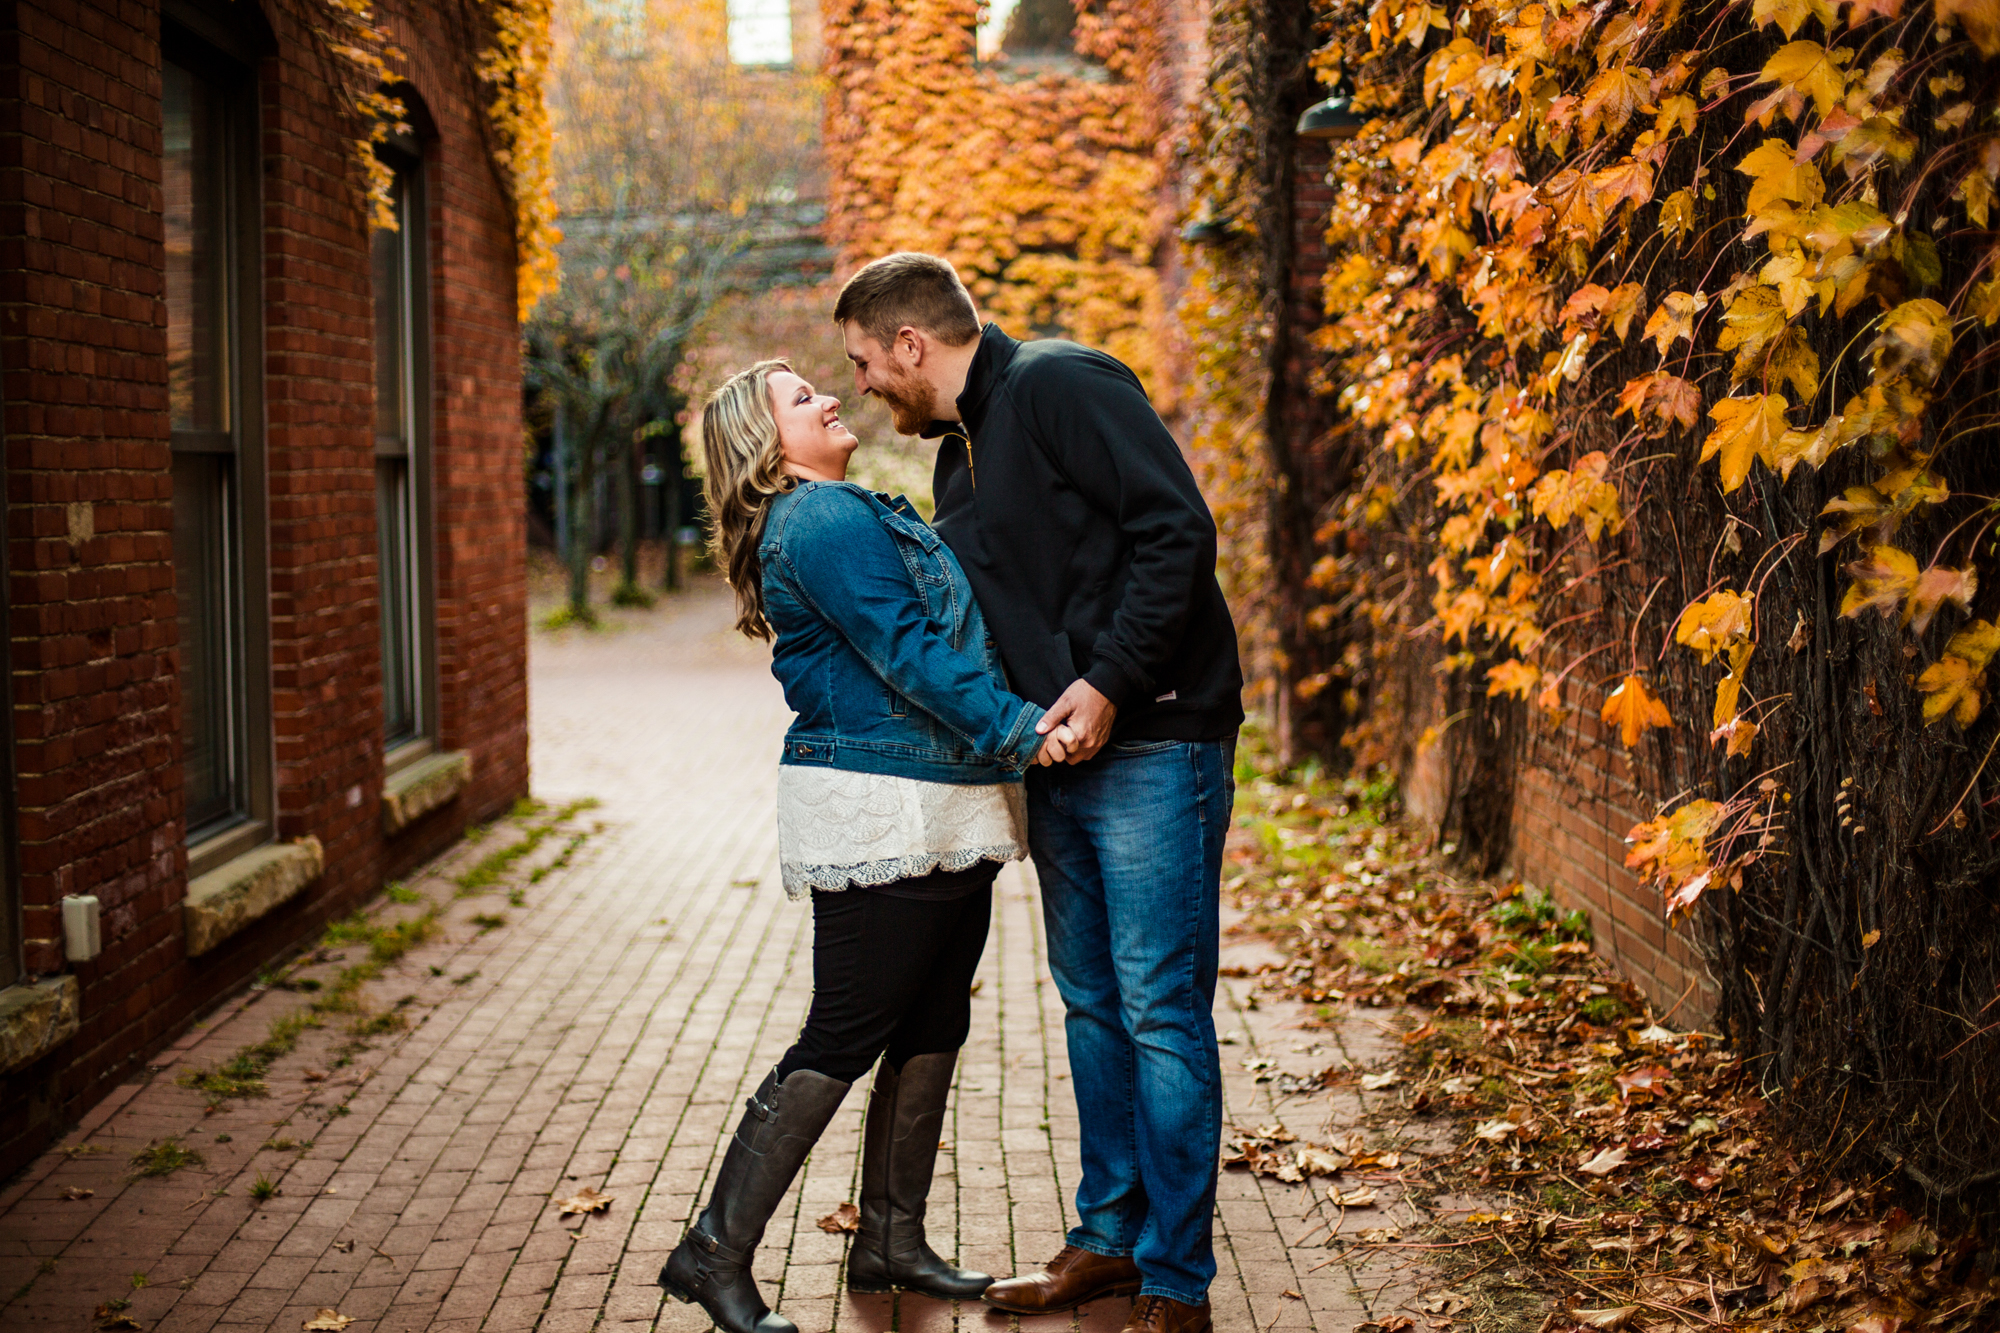 Couple laughing together as man leans in to kiss woman during Modern Tool Square engagement photos